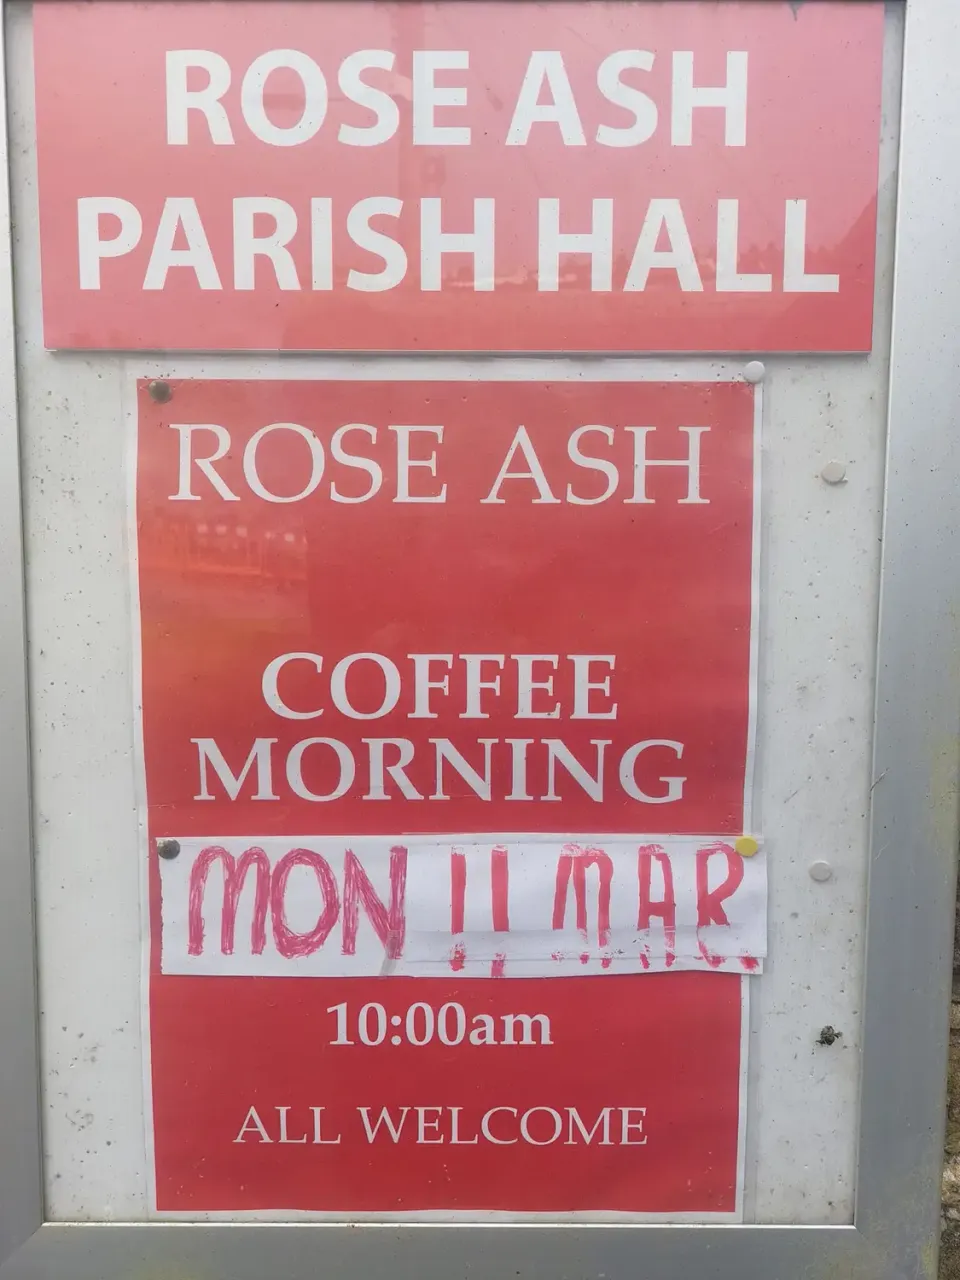 Monday 11 March 10 AM: Coffee Morning at the Village hall